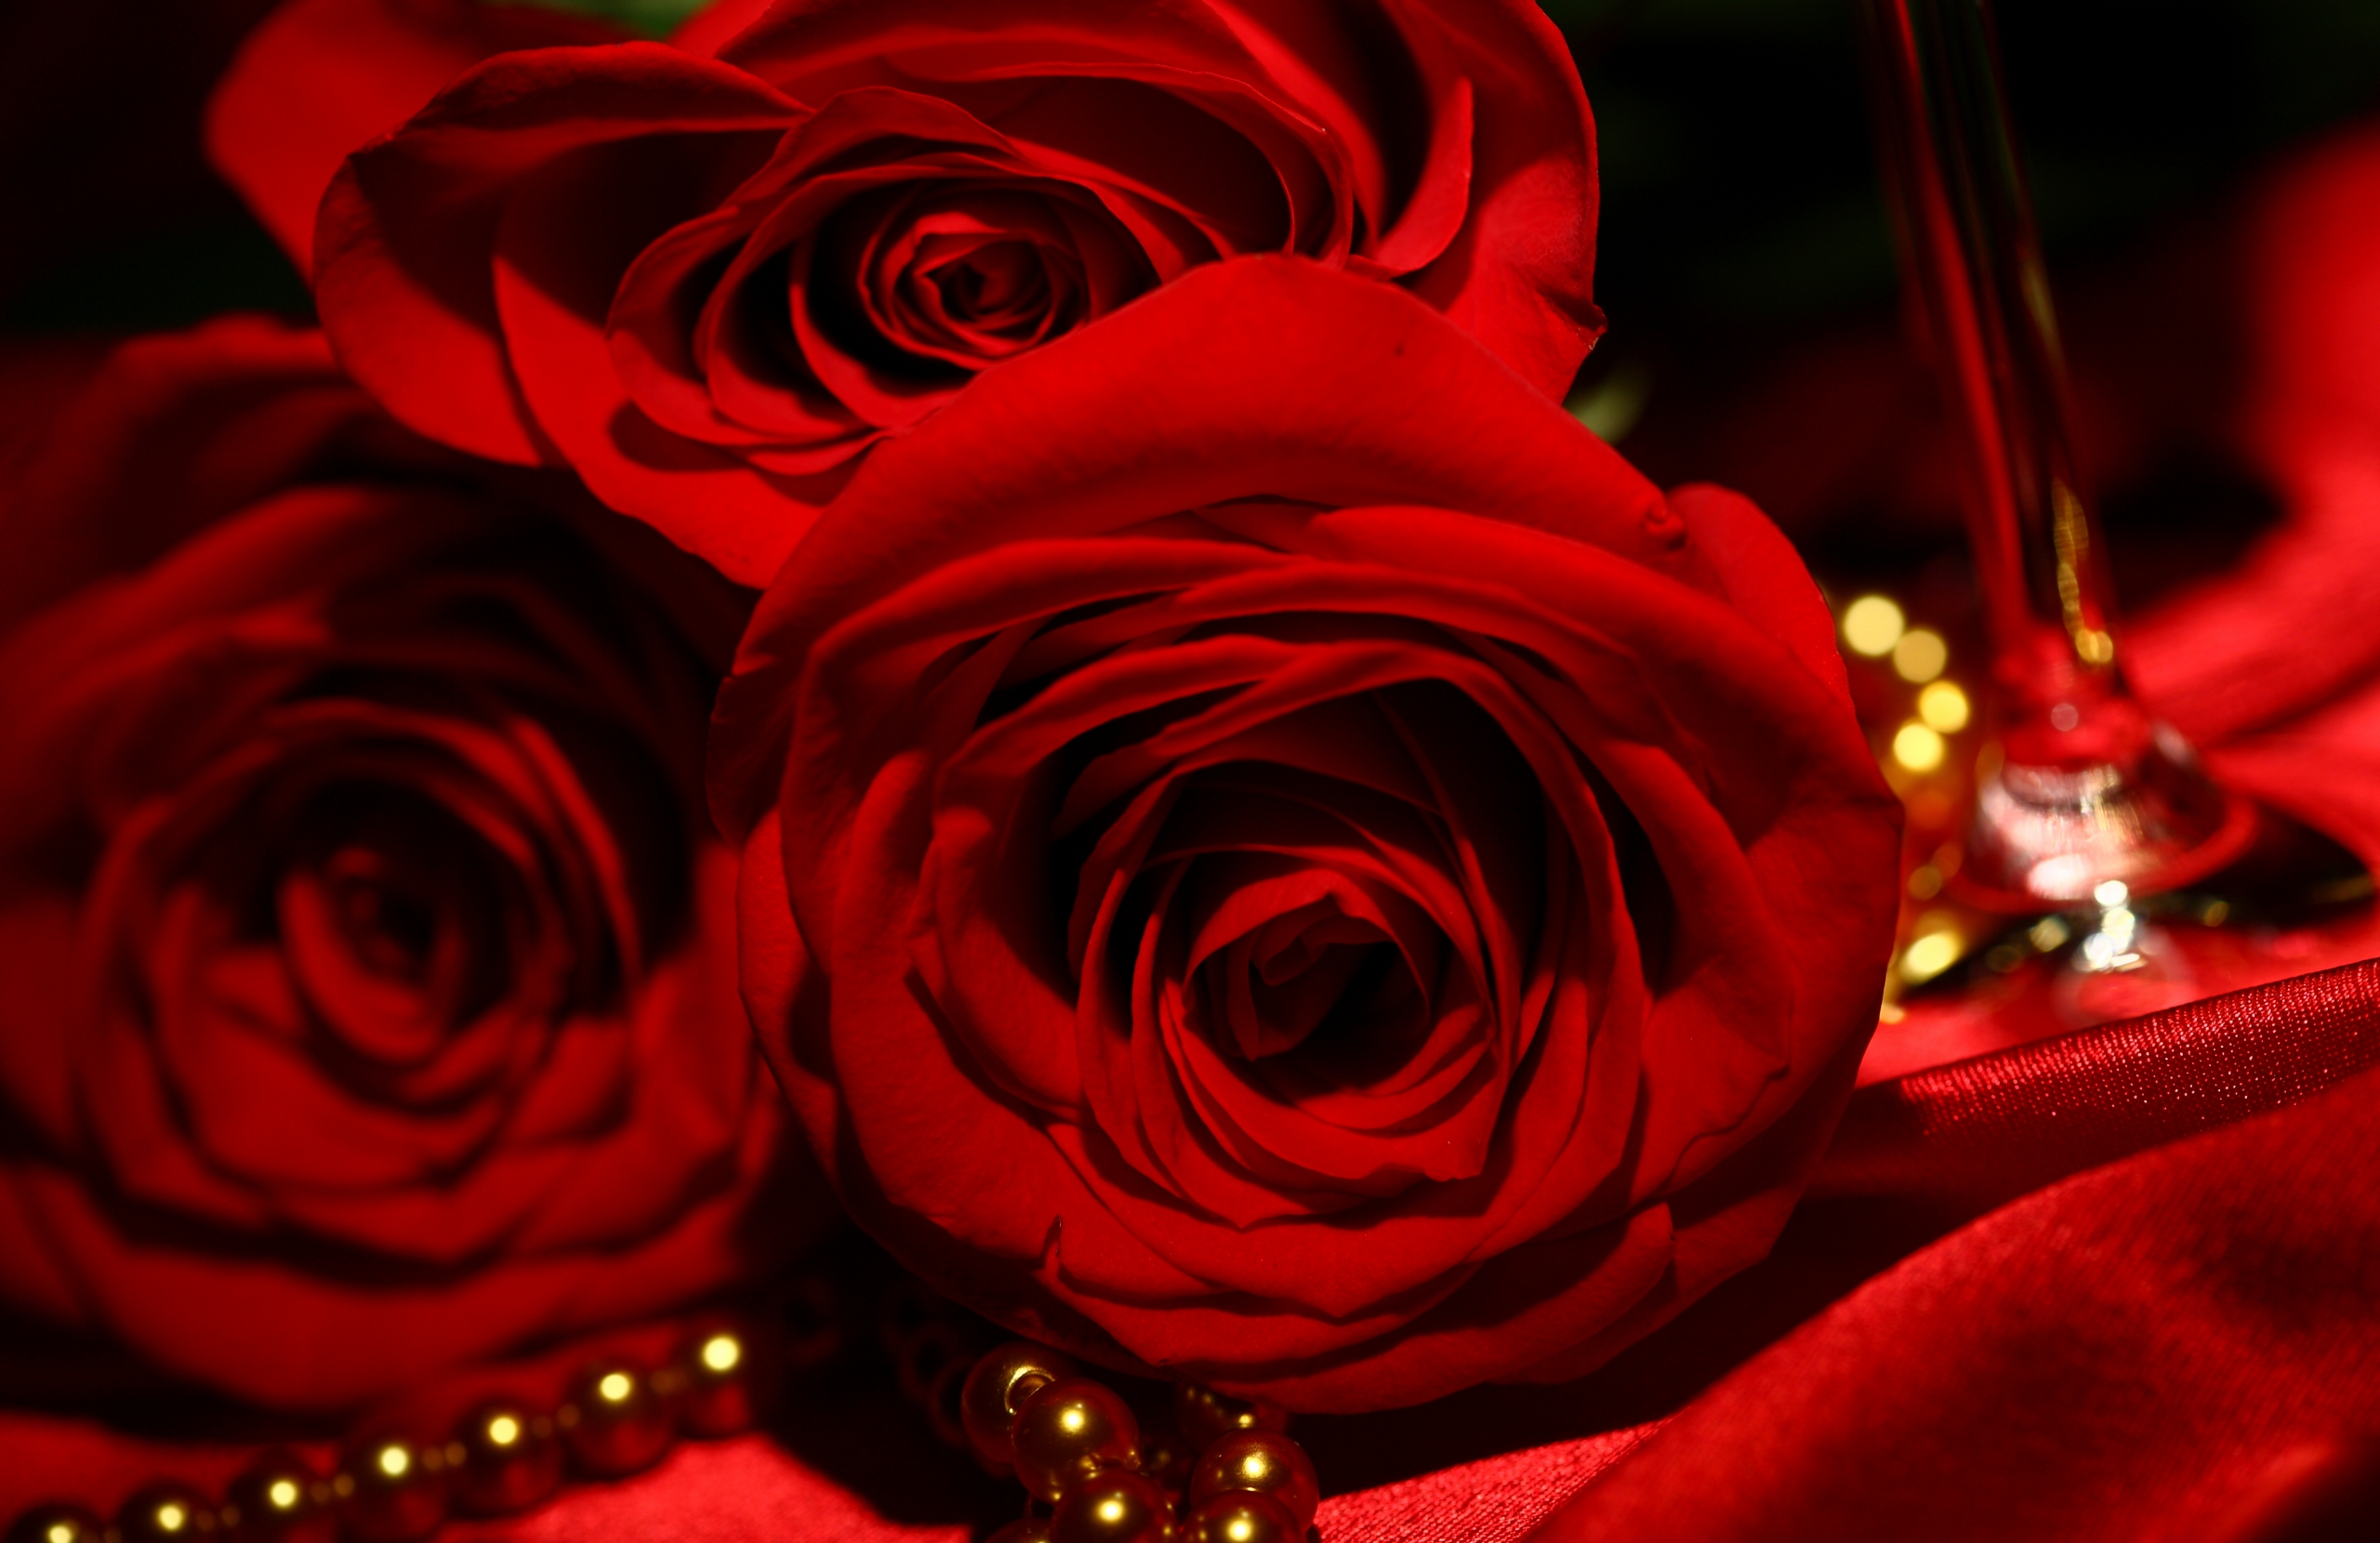 Red Roses Background Wallpaper High Definition Quality